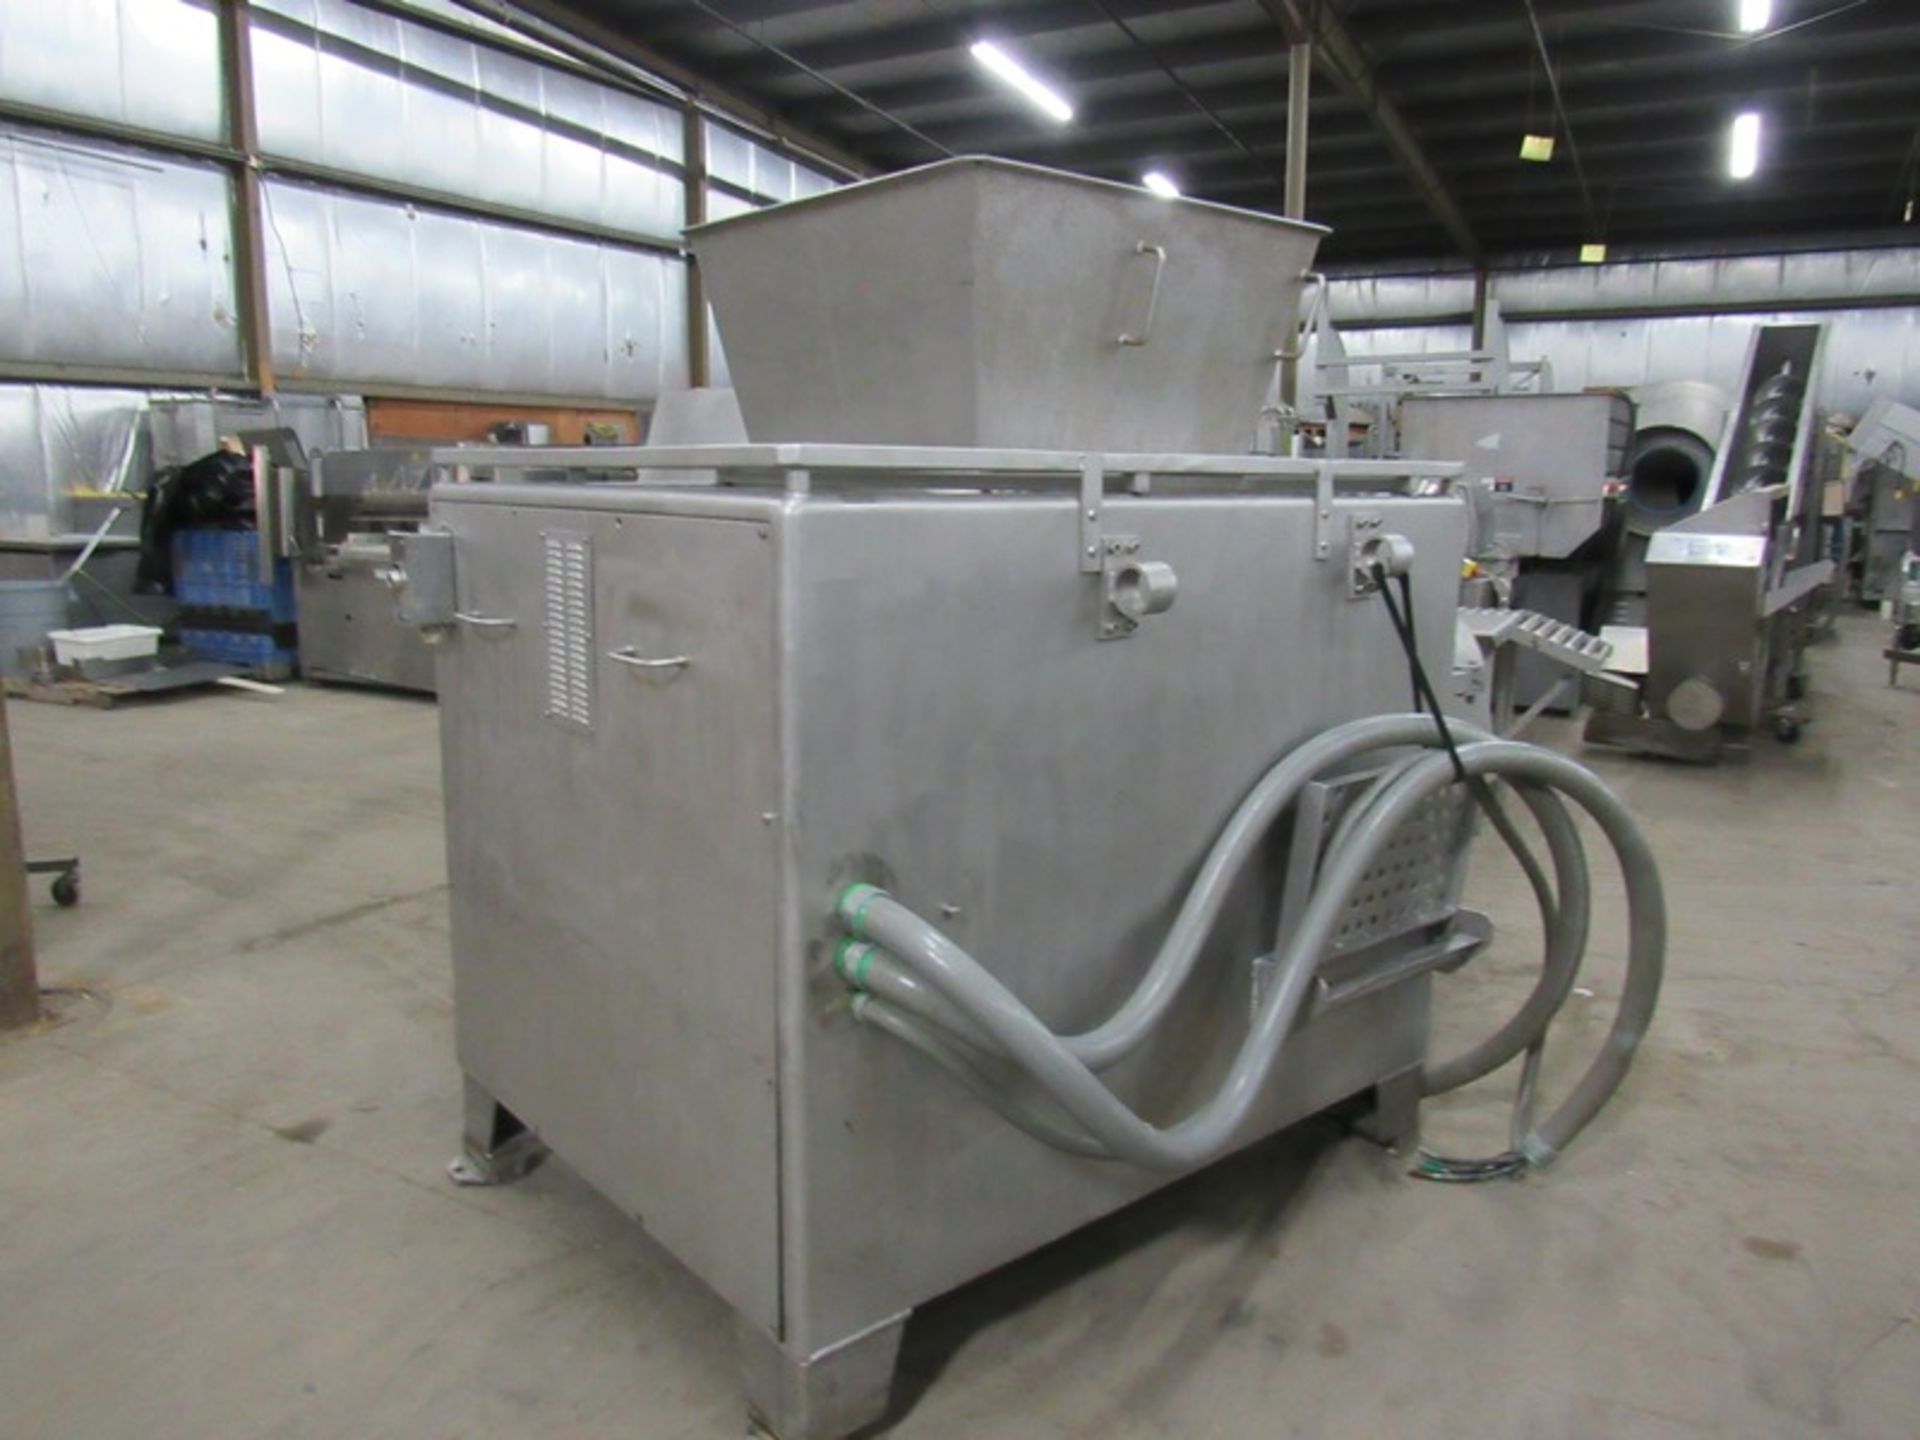 Frozen Block Grinder, 2 speed. 31" X 31" stainless steel feed hopper, on stainless steel safety - Image 3 of 9